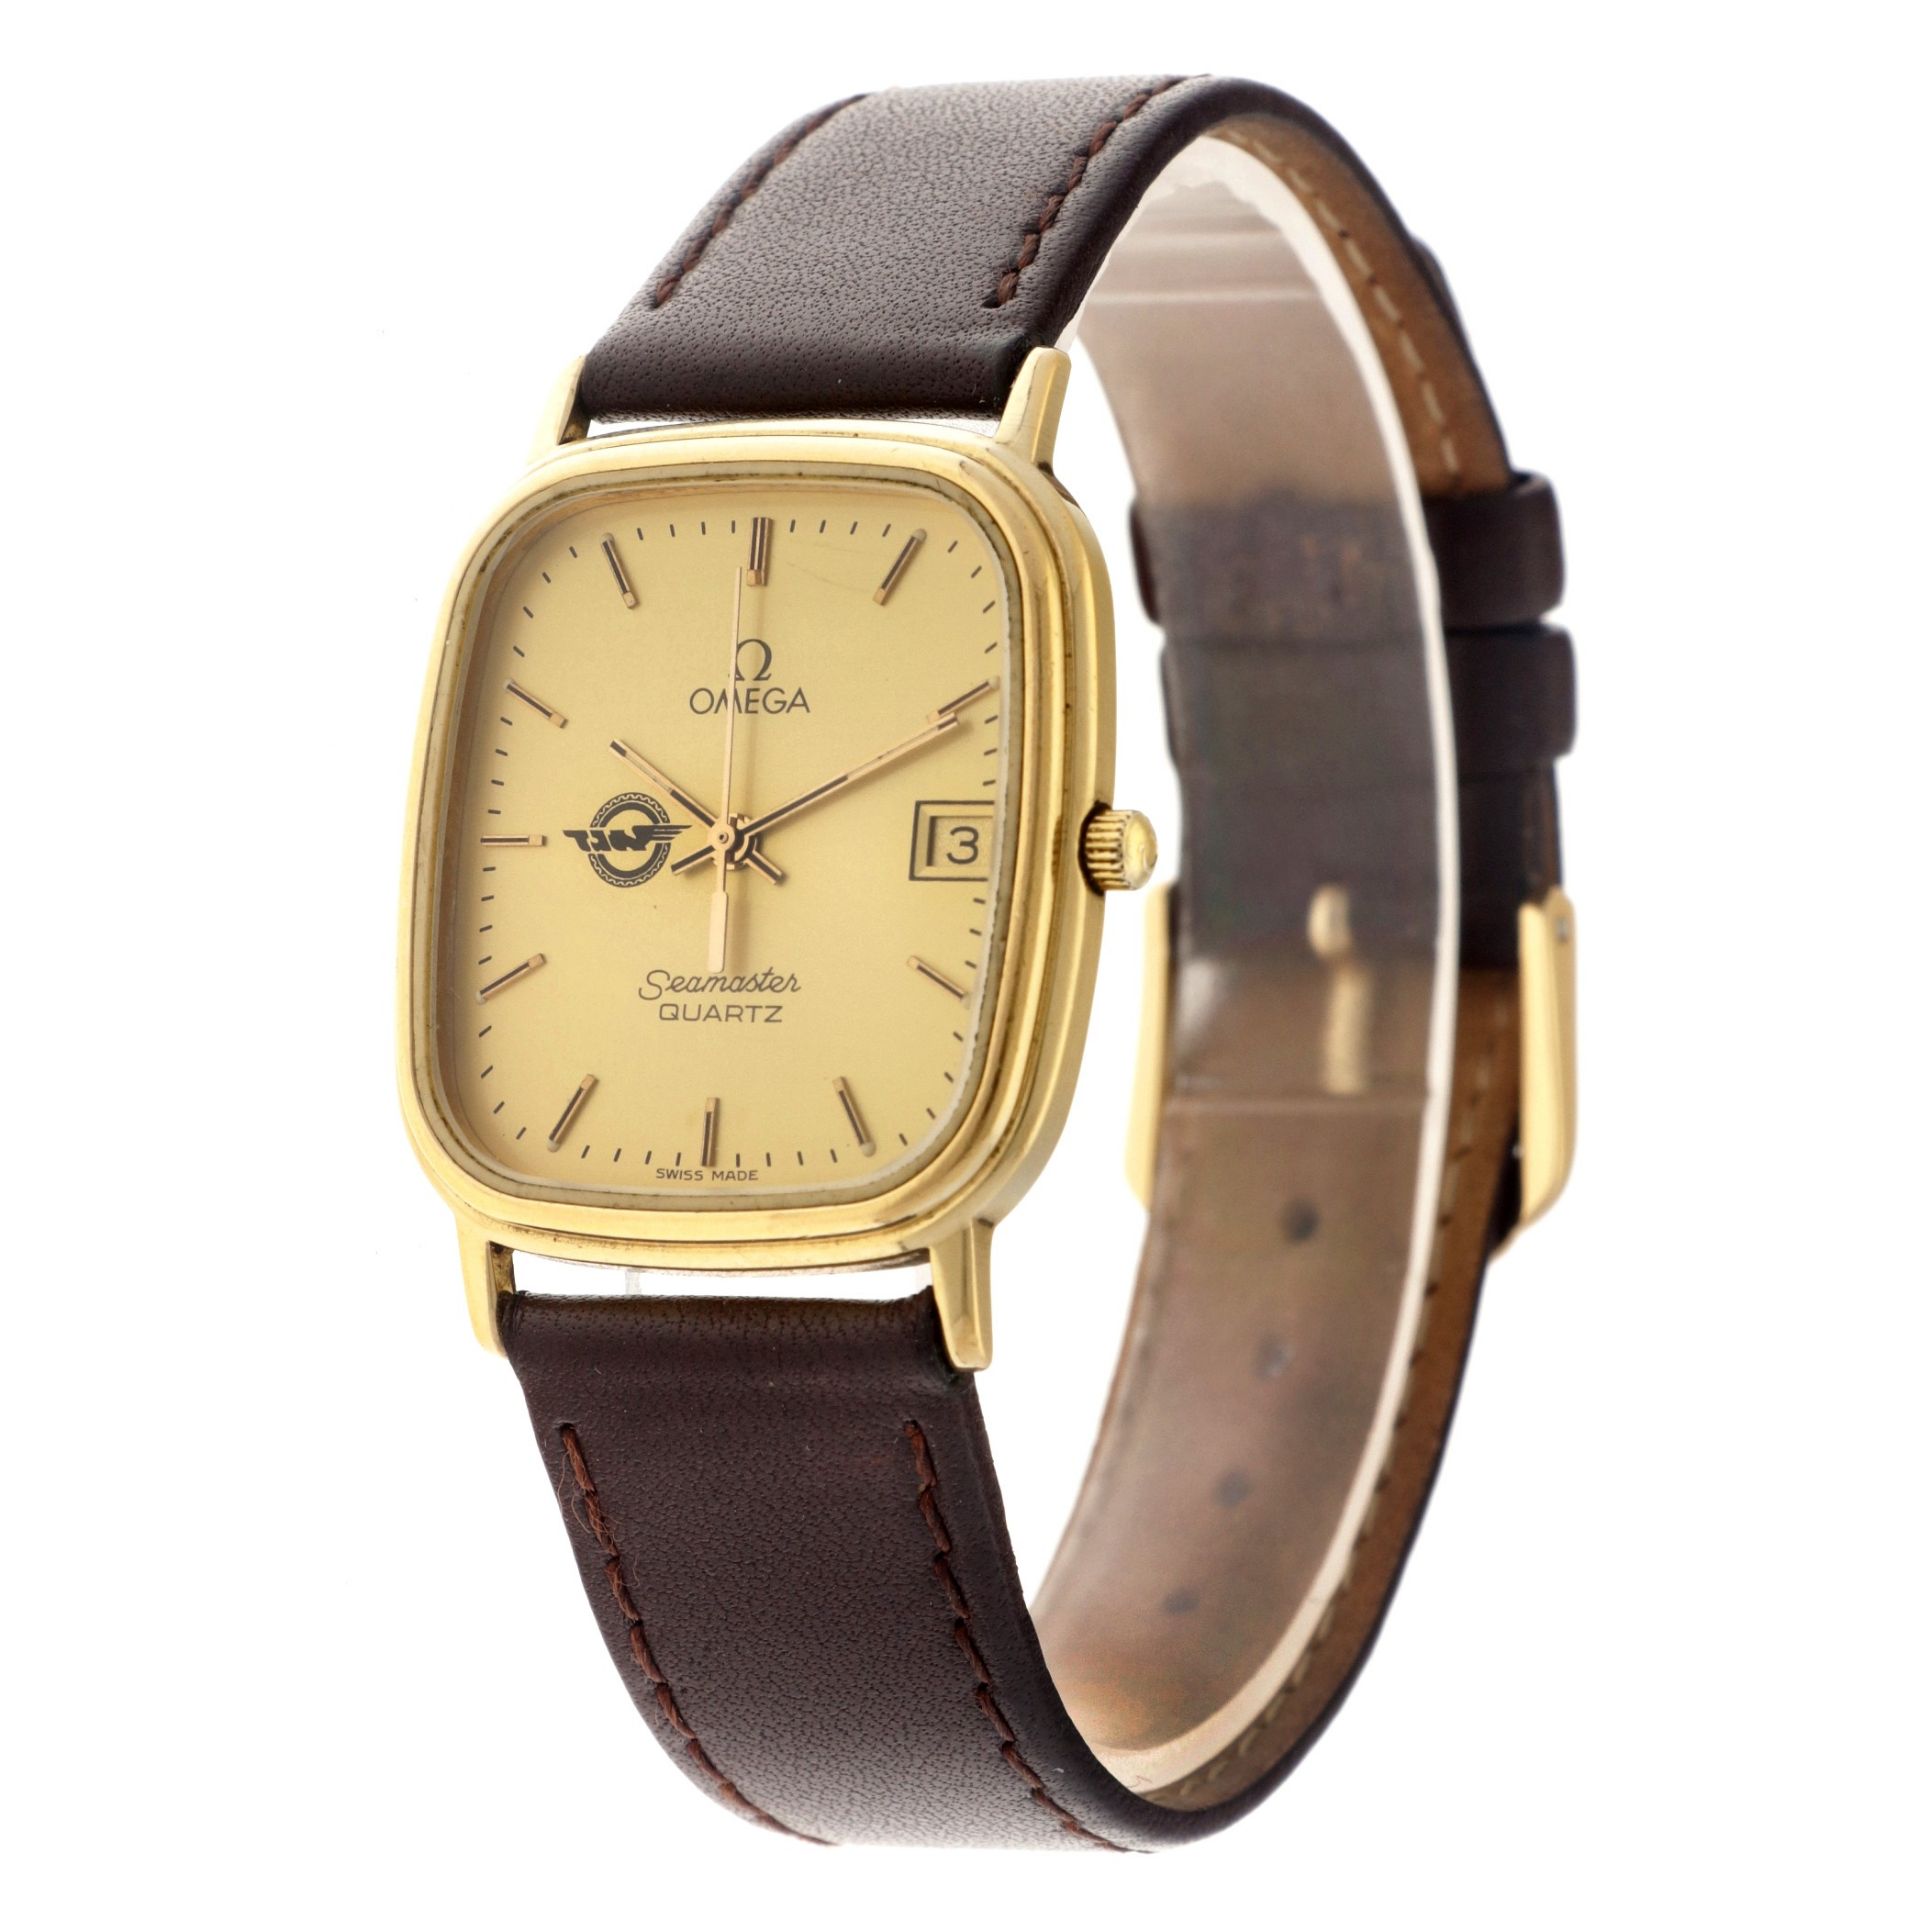 No Reserve - Omega Seamaster 1960267 - Men's watch - approx. 1984 - Image 2 of 5